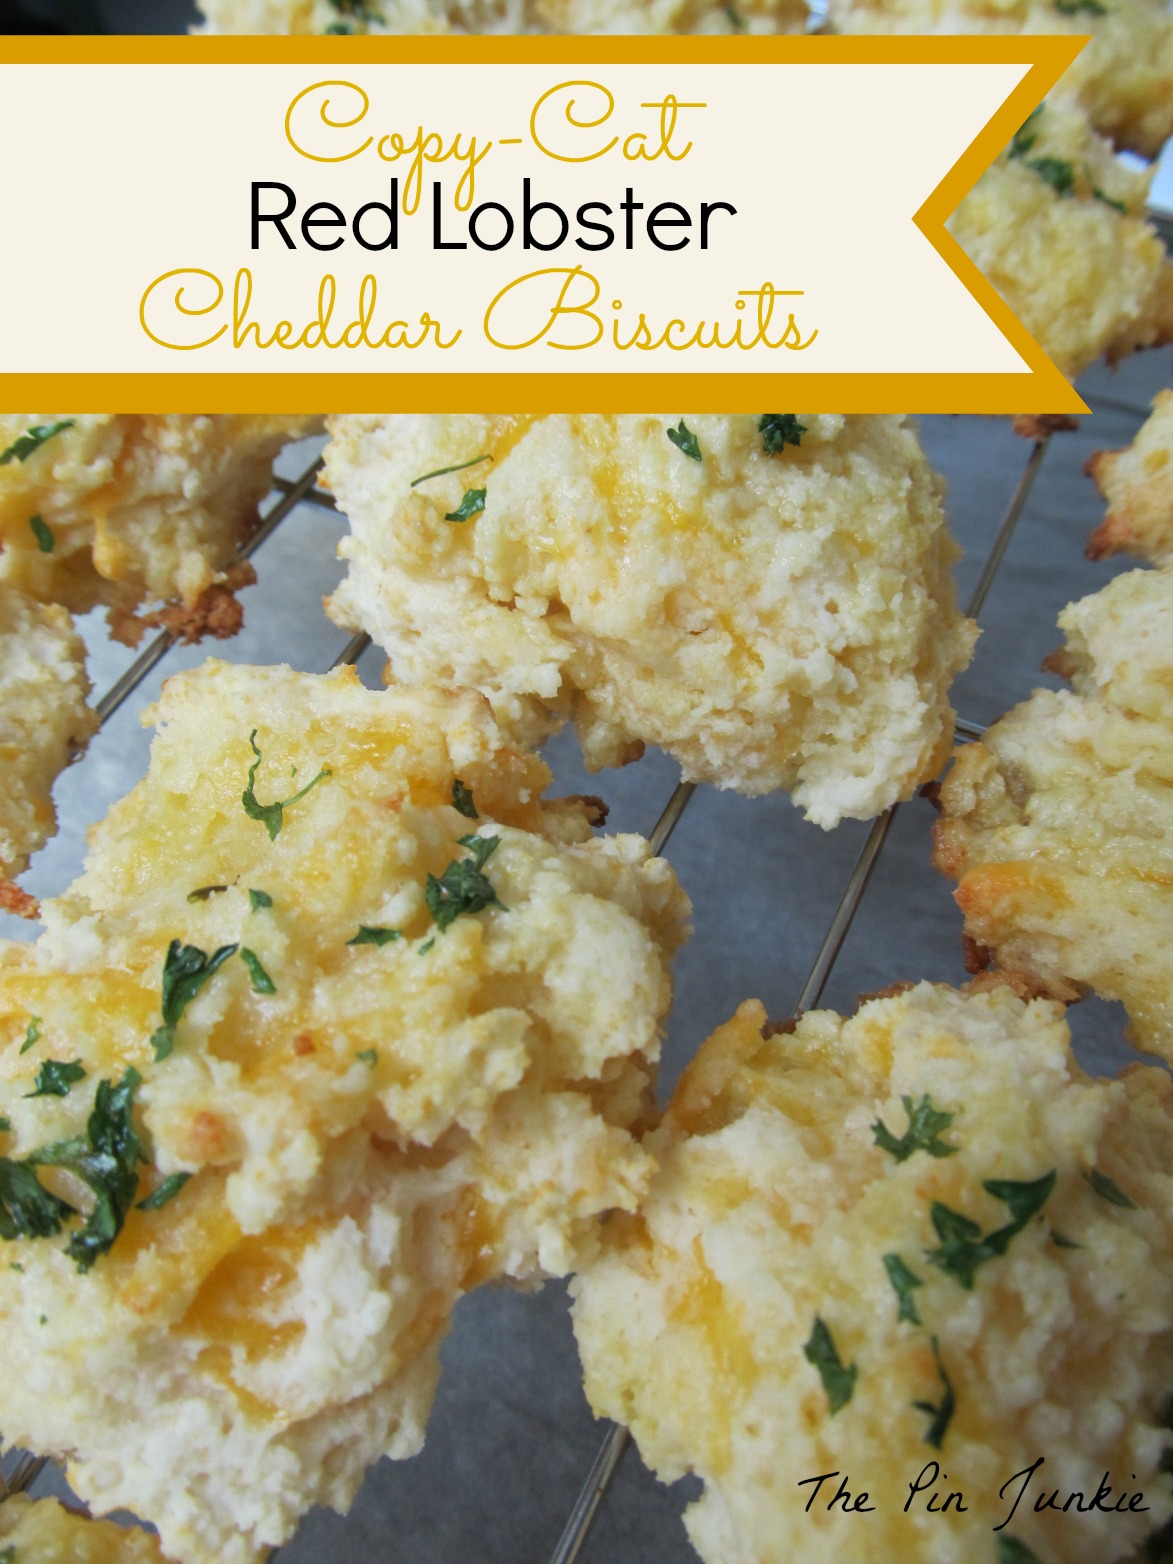 red lobster cheddar biscuits recipe